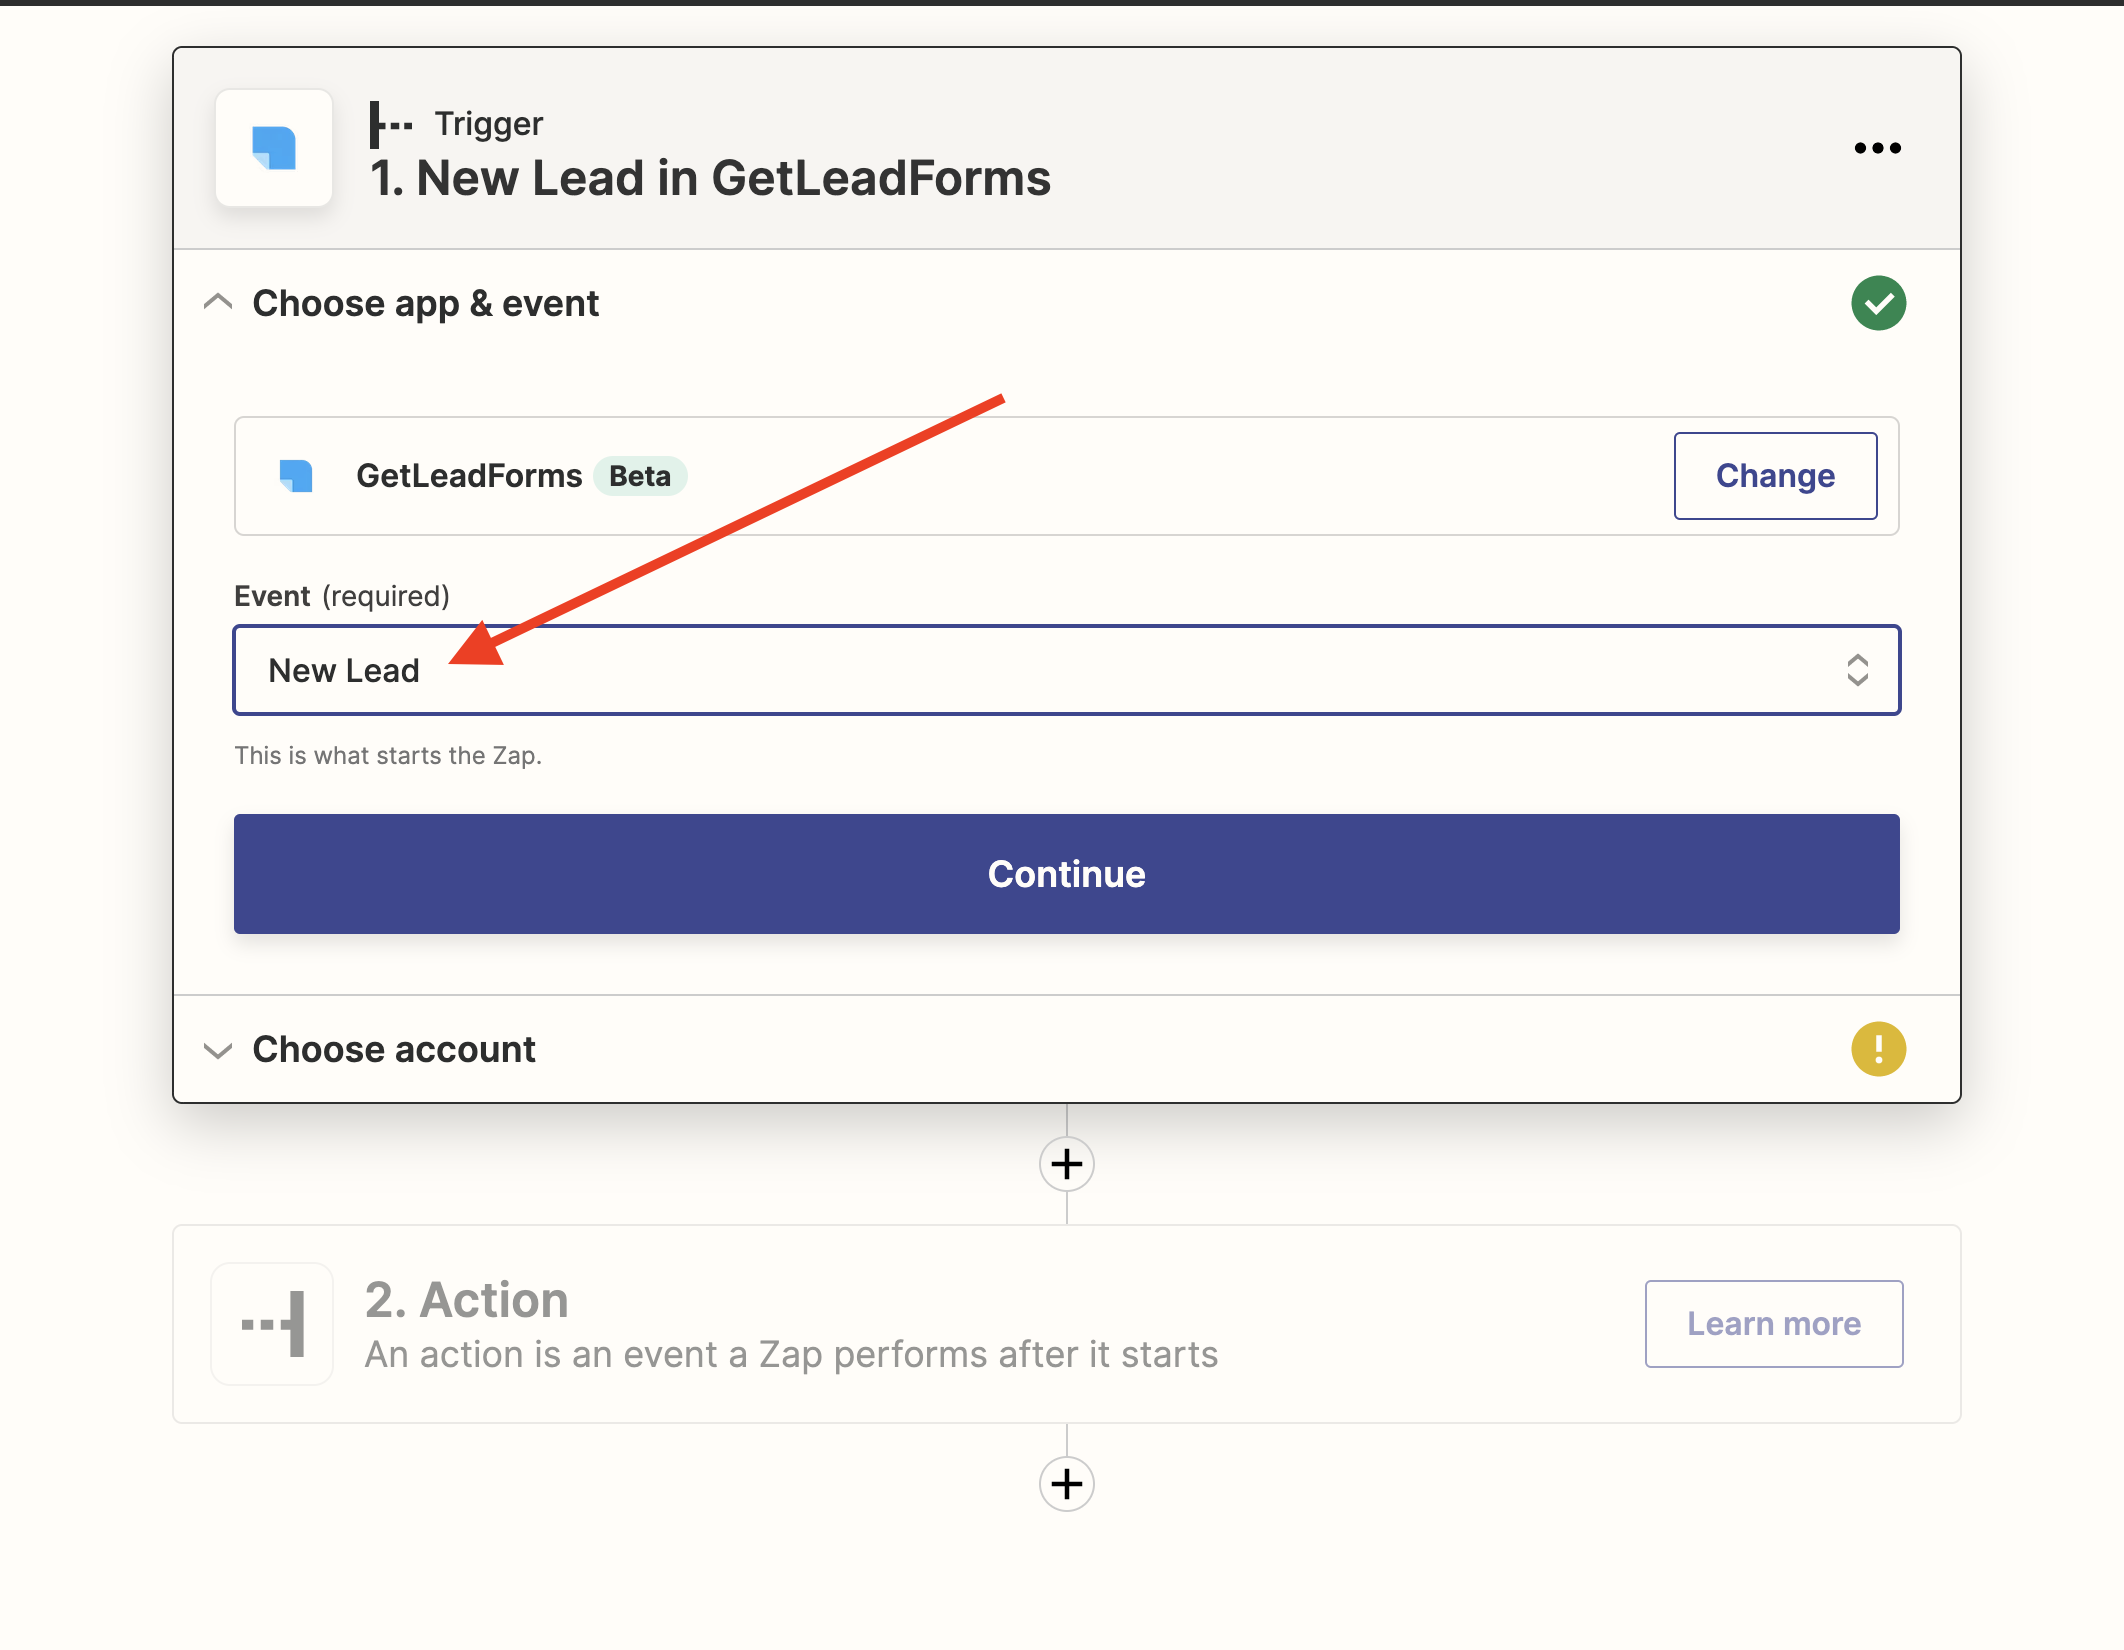 select an event - new lead